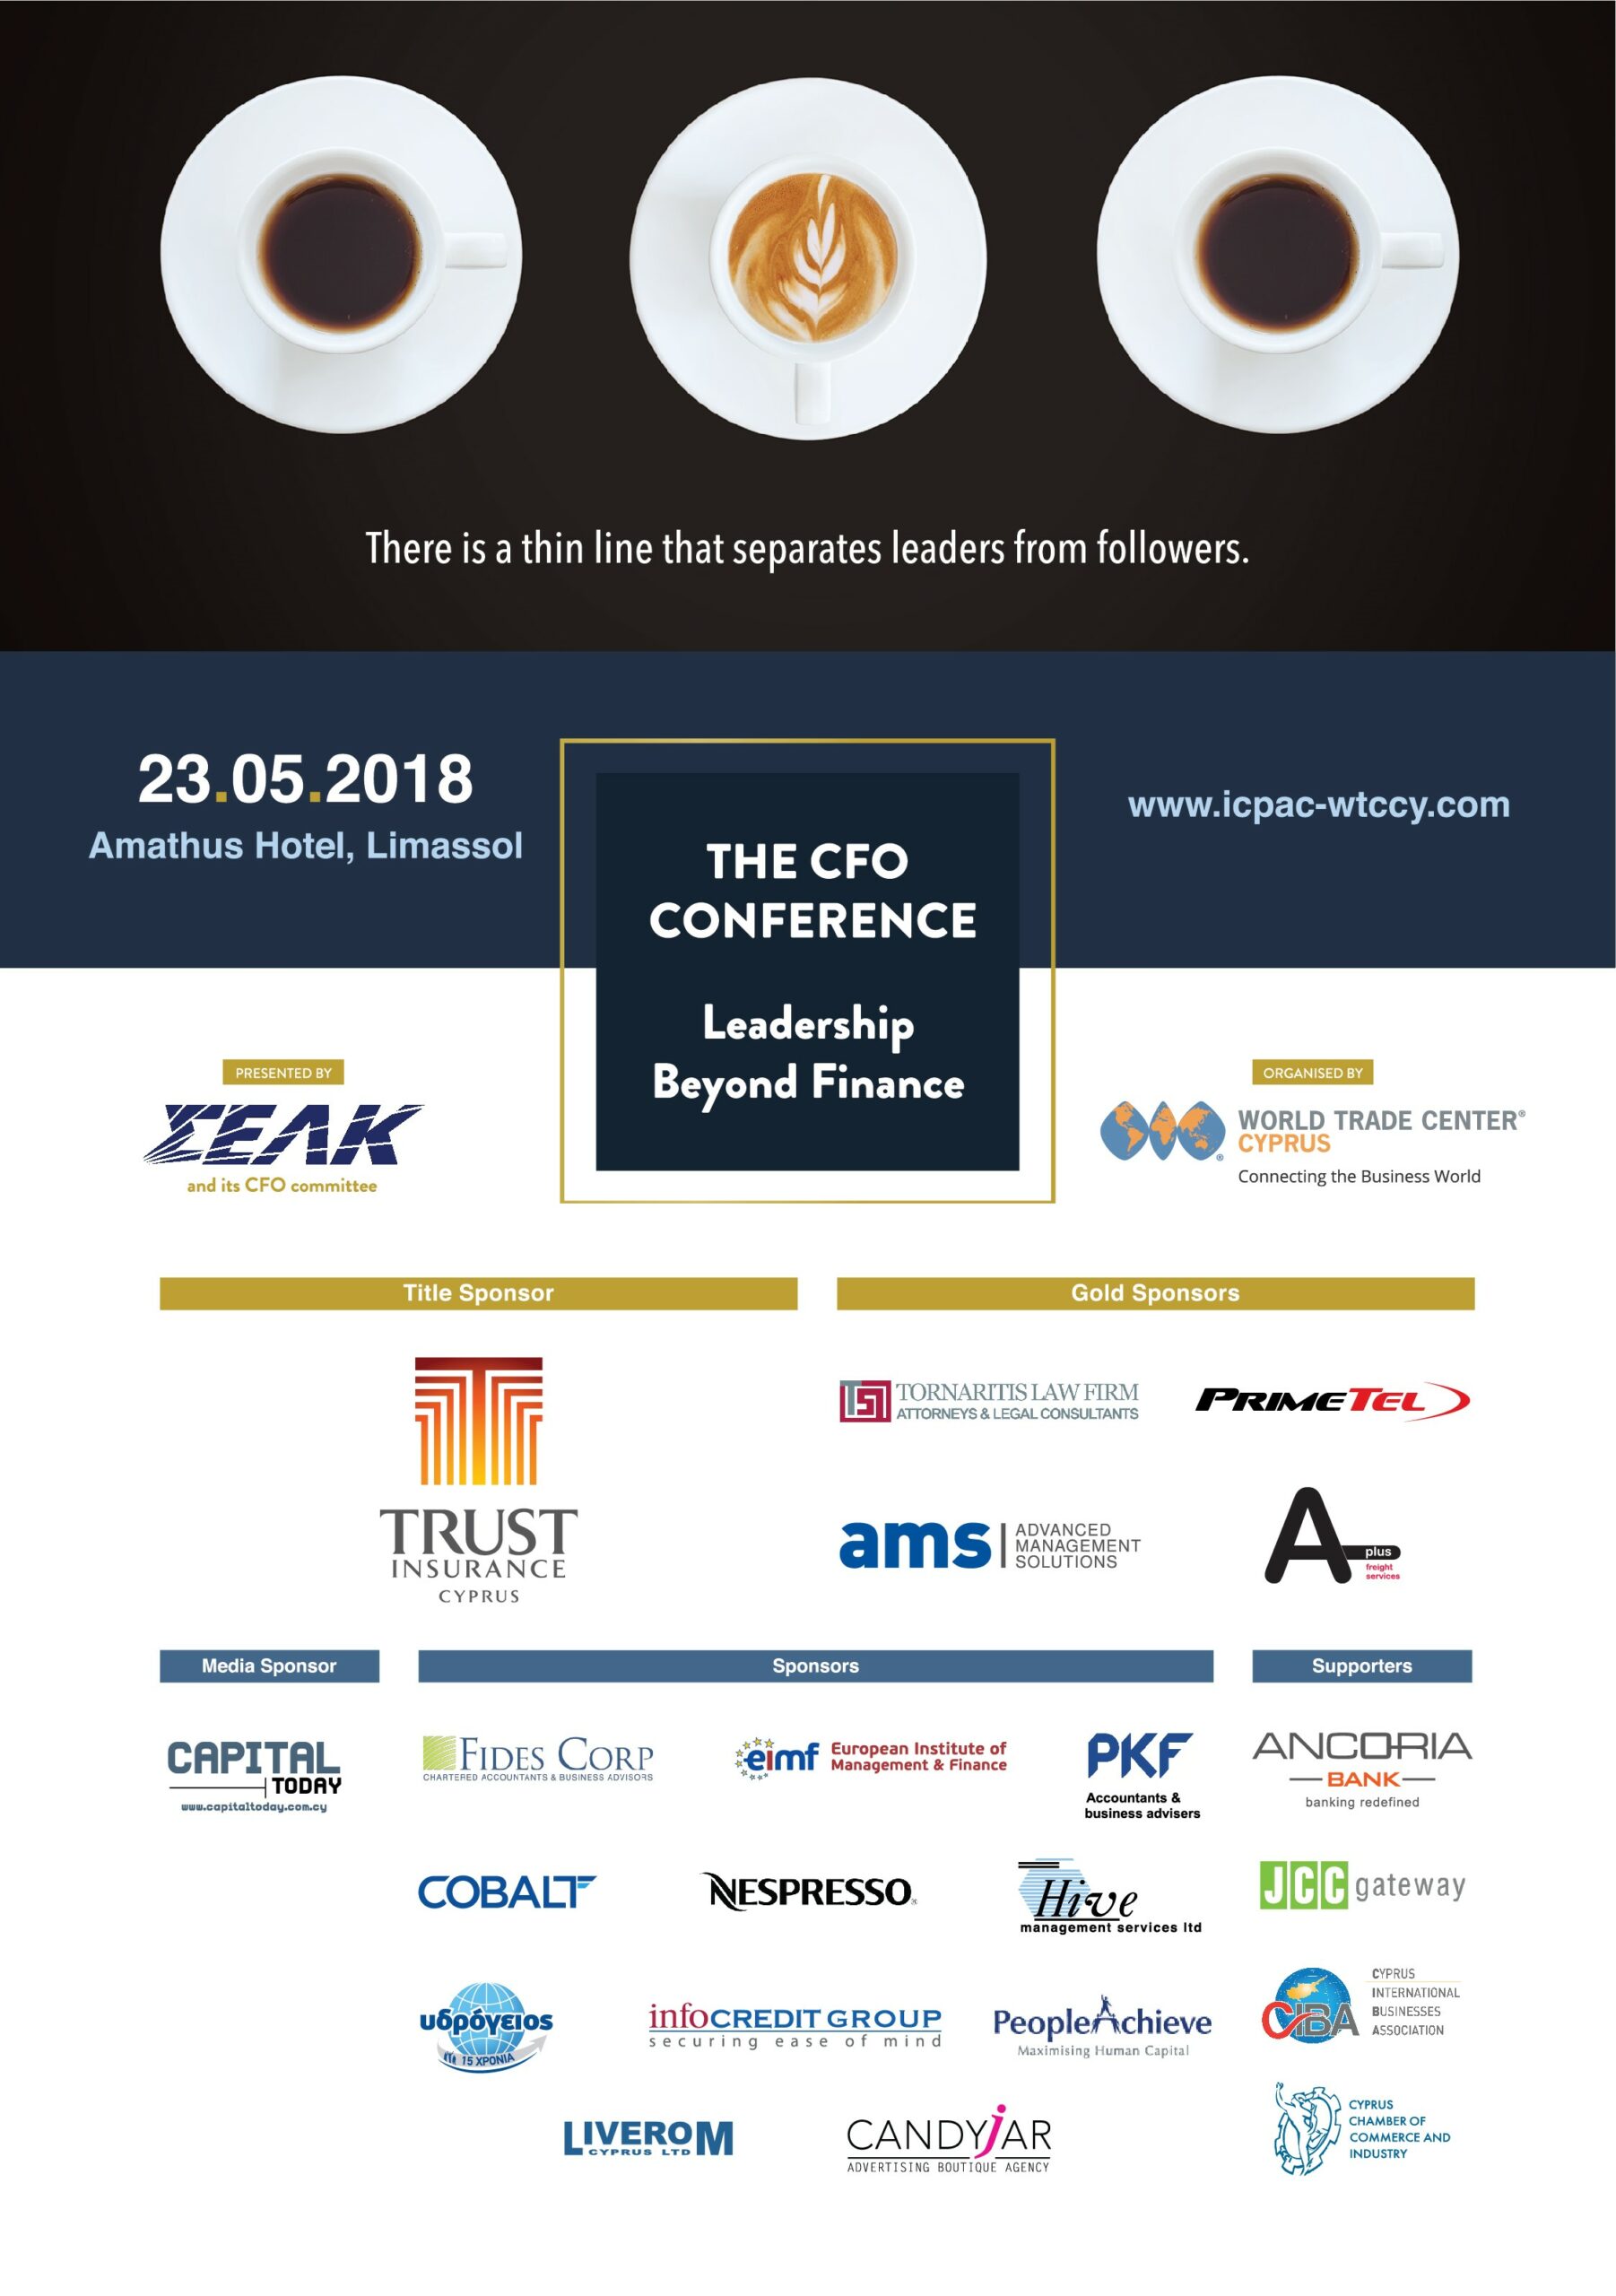 Tornaritis Law Firm is the Gold Sponsor of The CFO conference: Leadership Beyond Finance